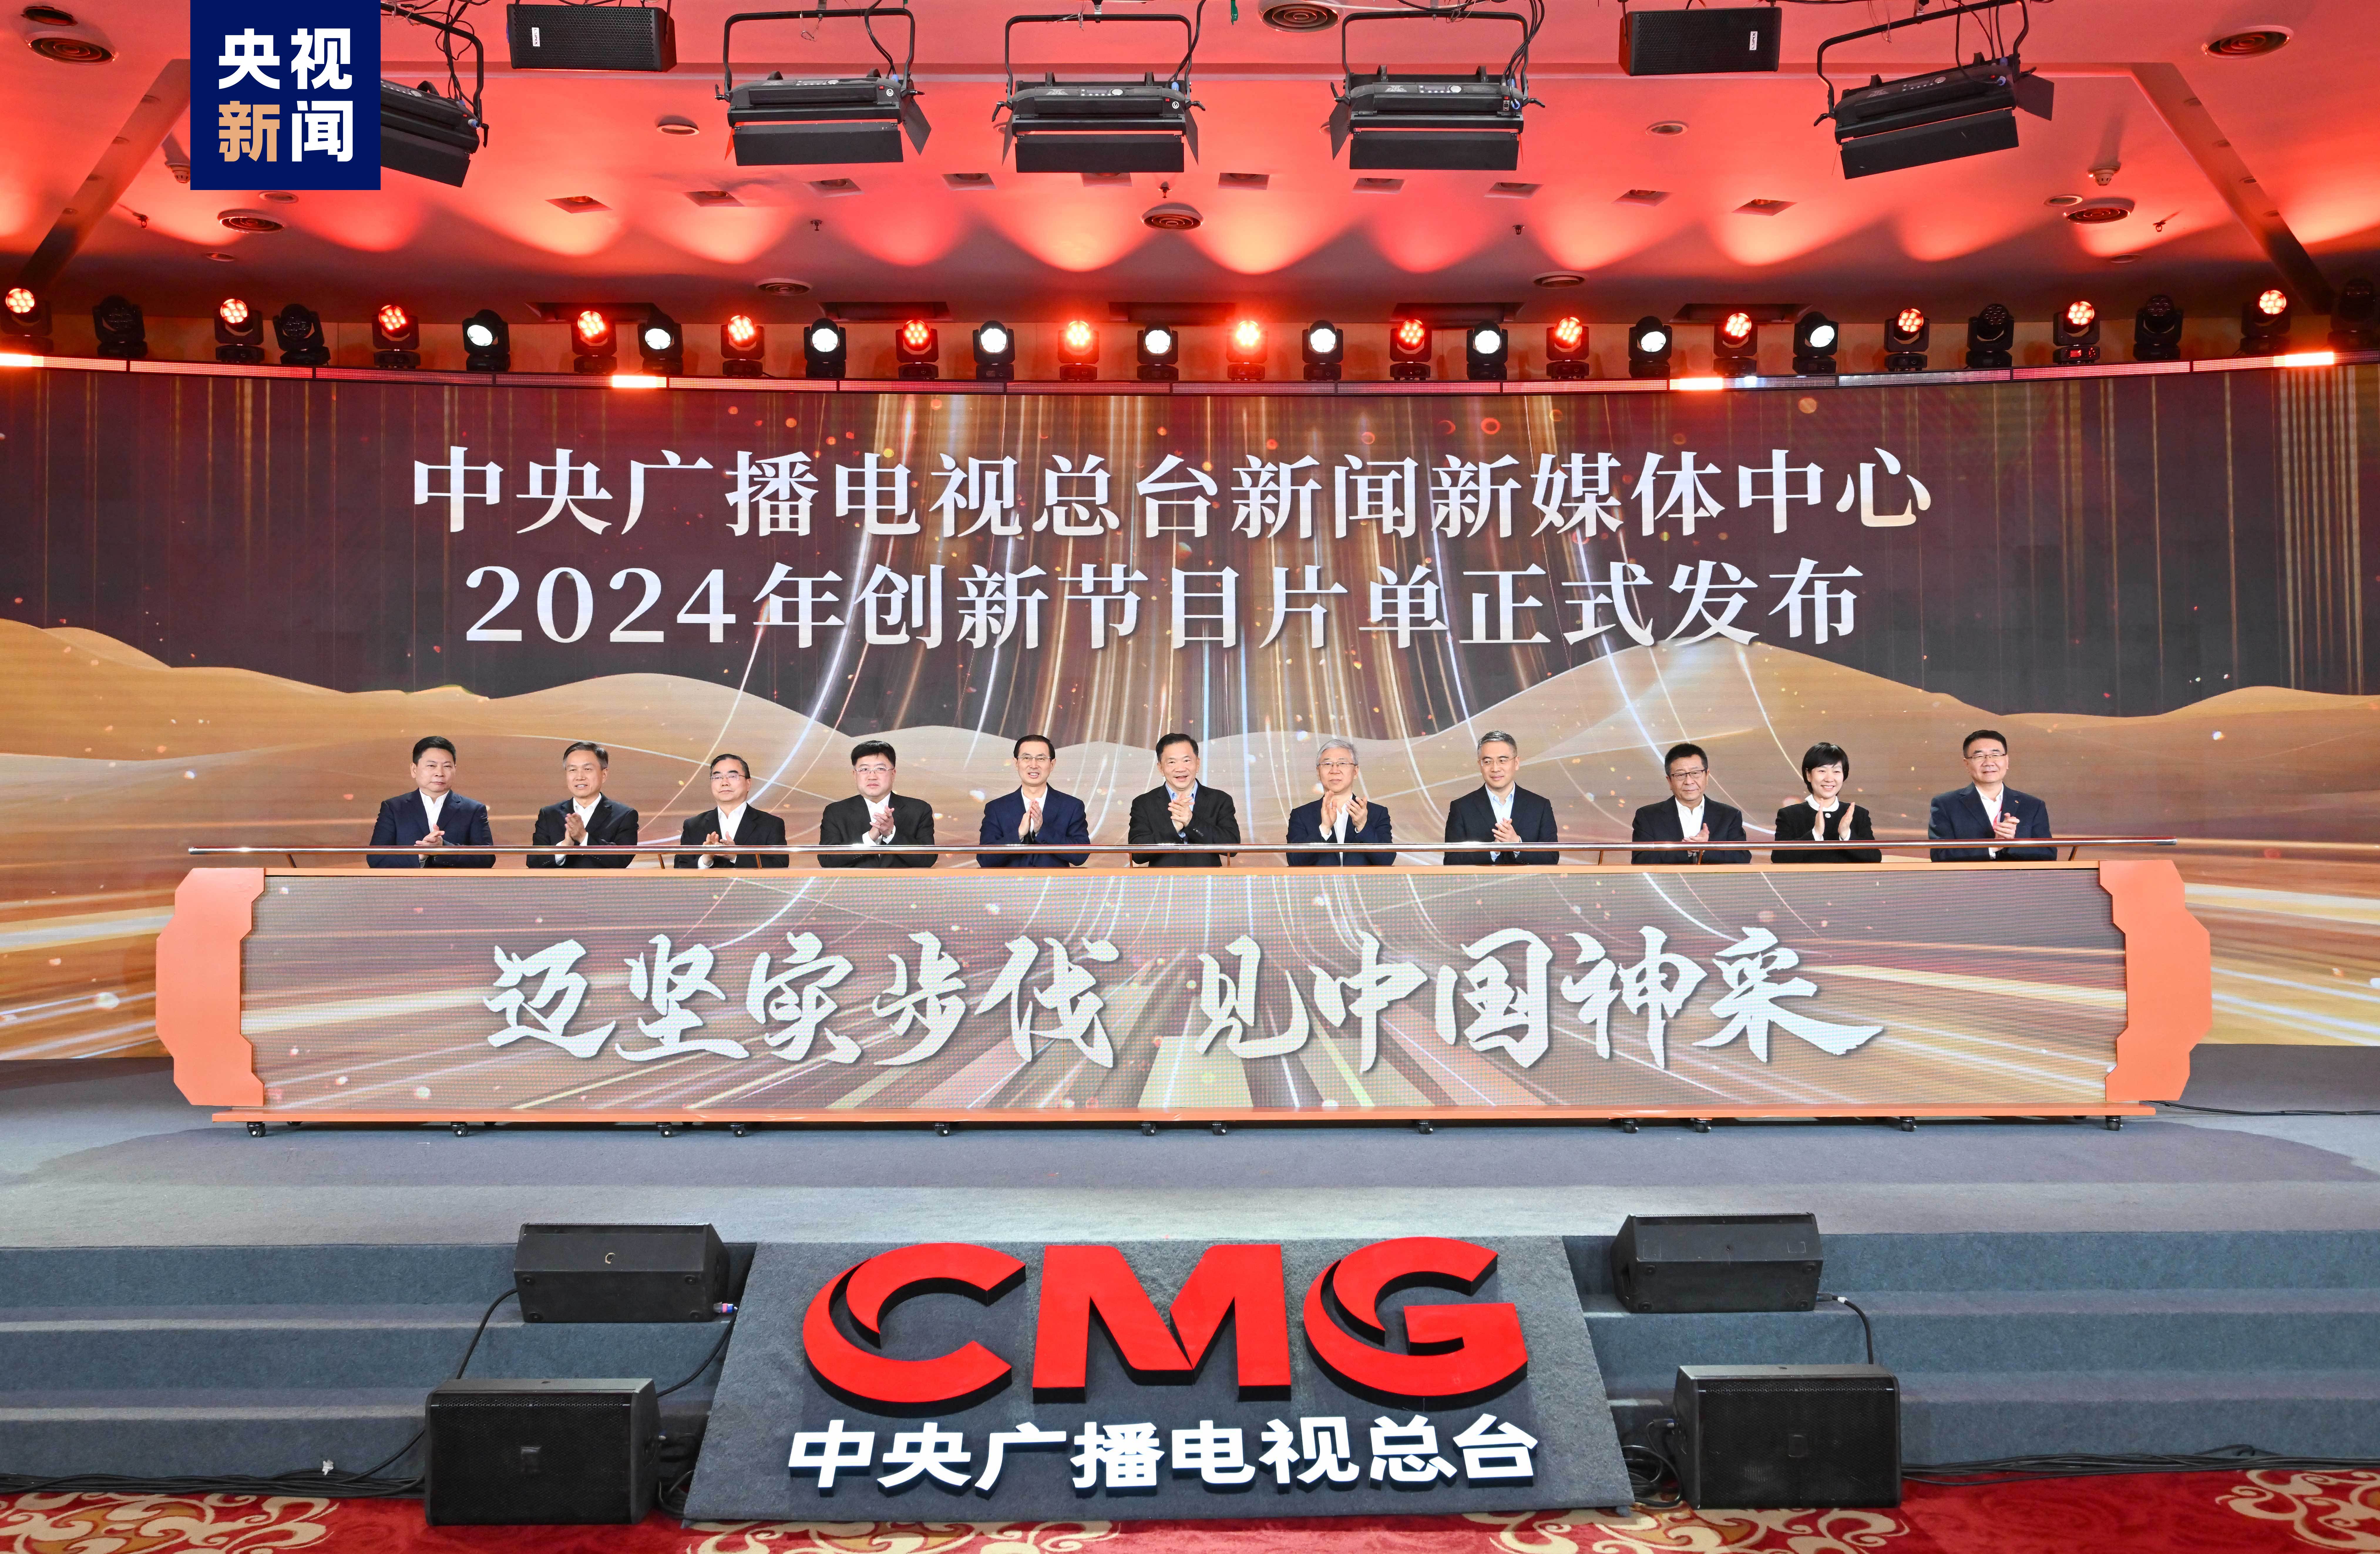 China Media Group holds a release ceremony of the 2024 innovative program list for its new media platforms in Beijing, February 7, 2024. /CMG